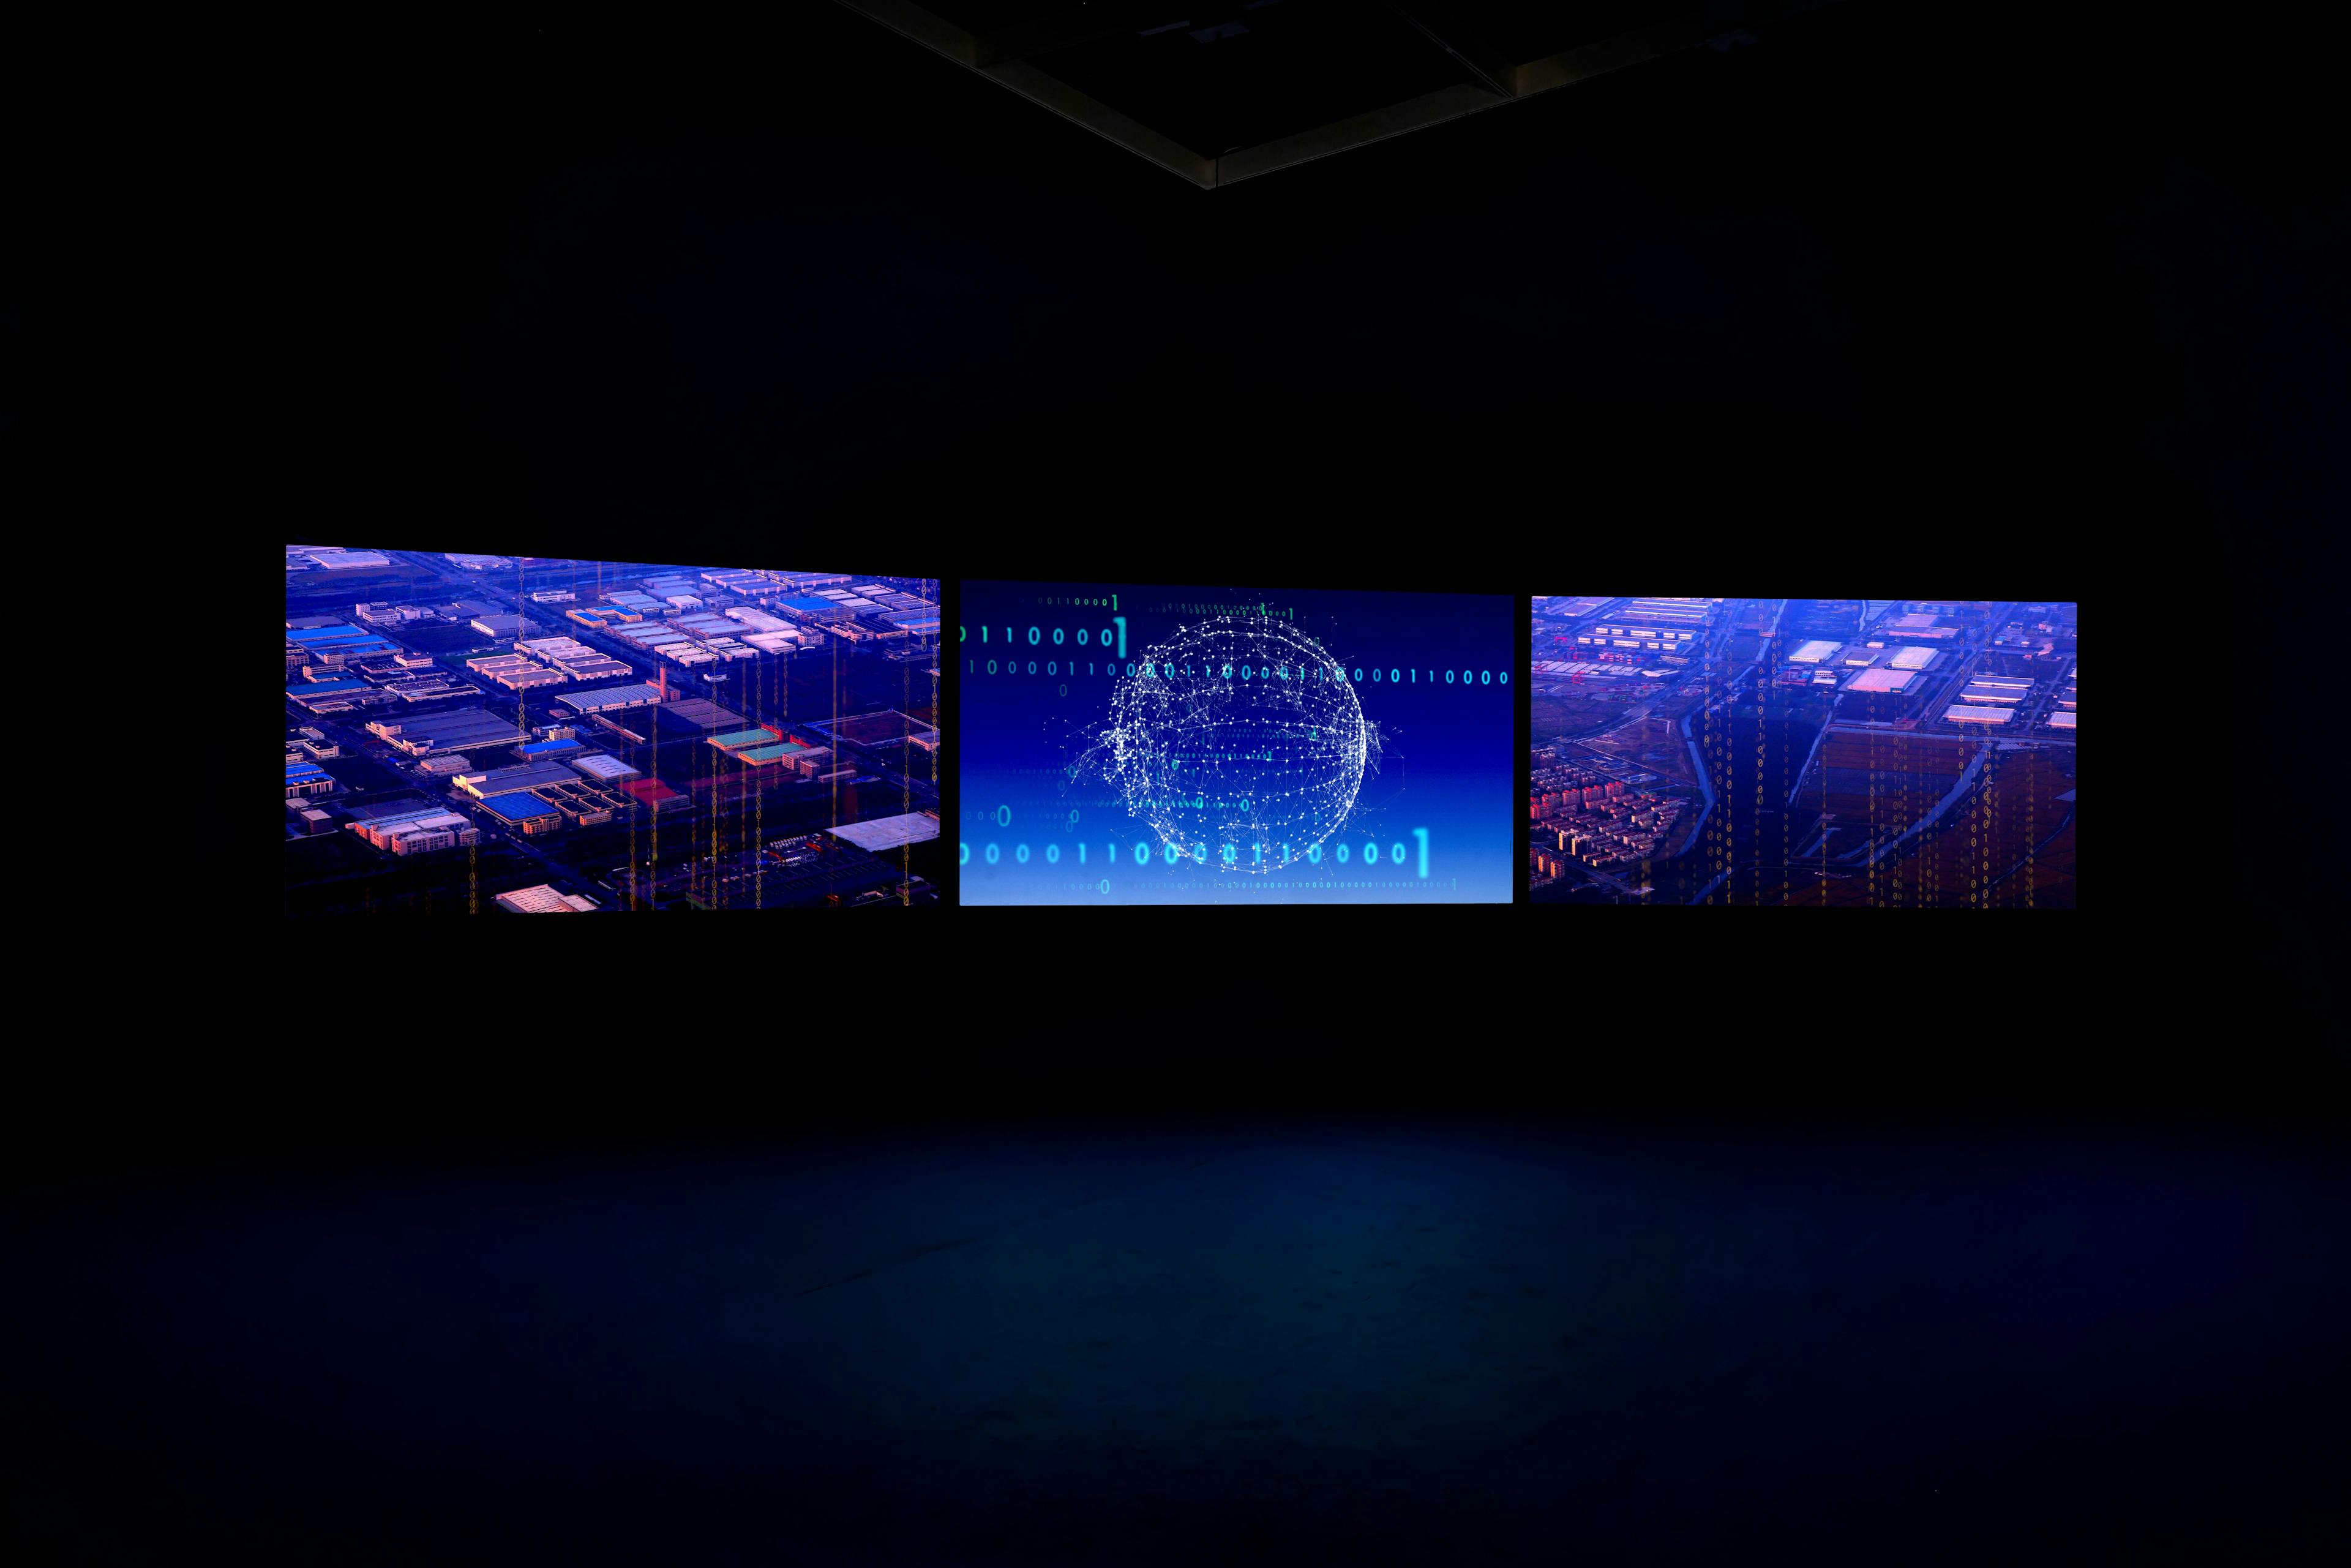 Shona Illingworth, Topologies of Air, 2021. Three-channel digital video and multichannel sound installation, 45 min. Courtesy the artist. Installation view: Topologies of Air, The Power Plant, 2022. Photo: Toni Hafkenscheid